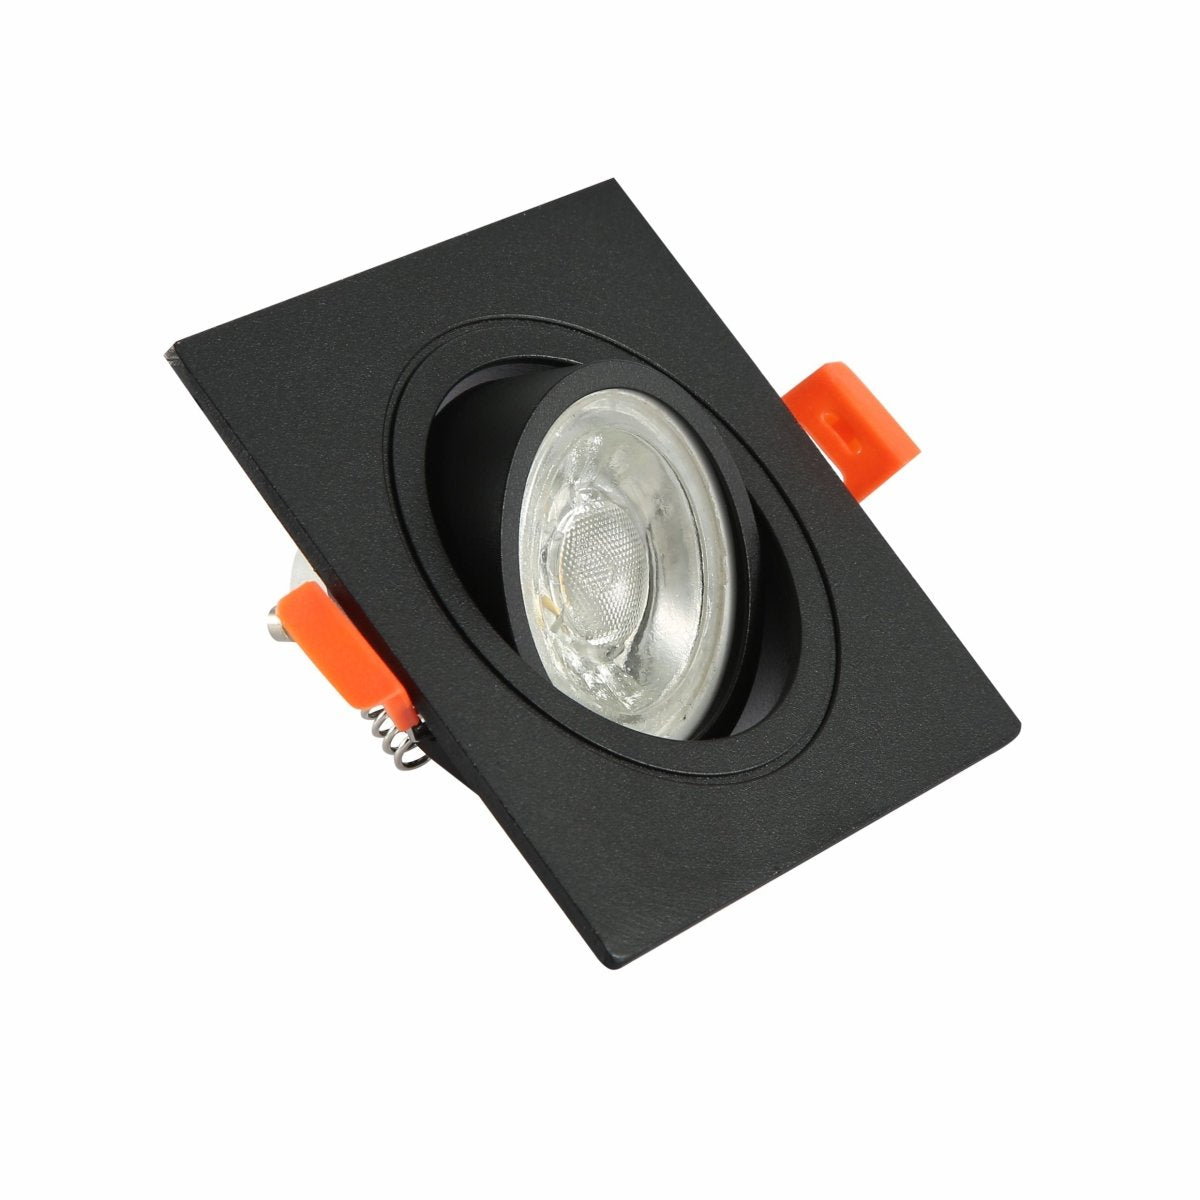 Main image of Square Recessed Tilt Downlight Black with GU10 Fitting | TEKLED 165-03890